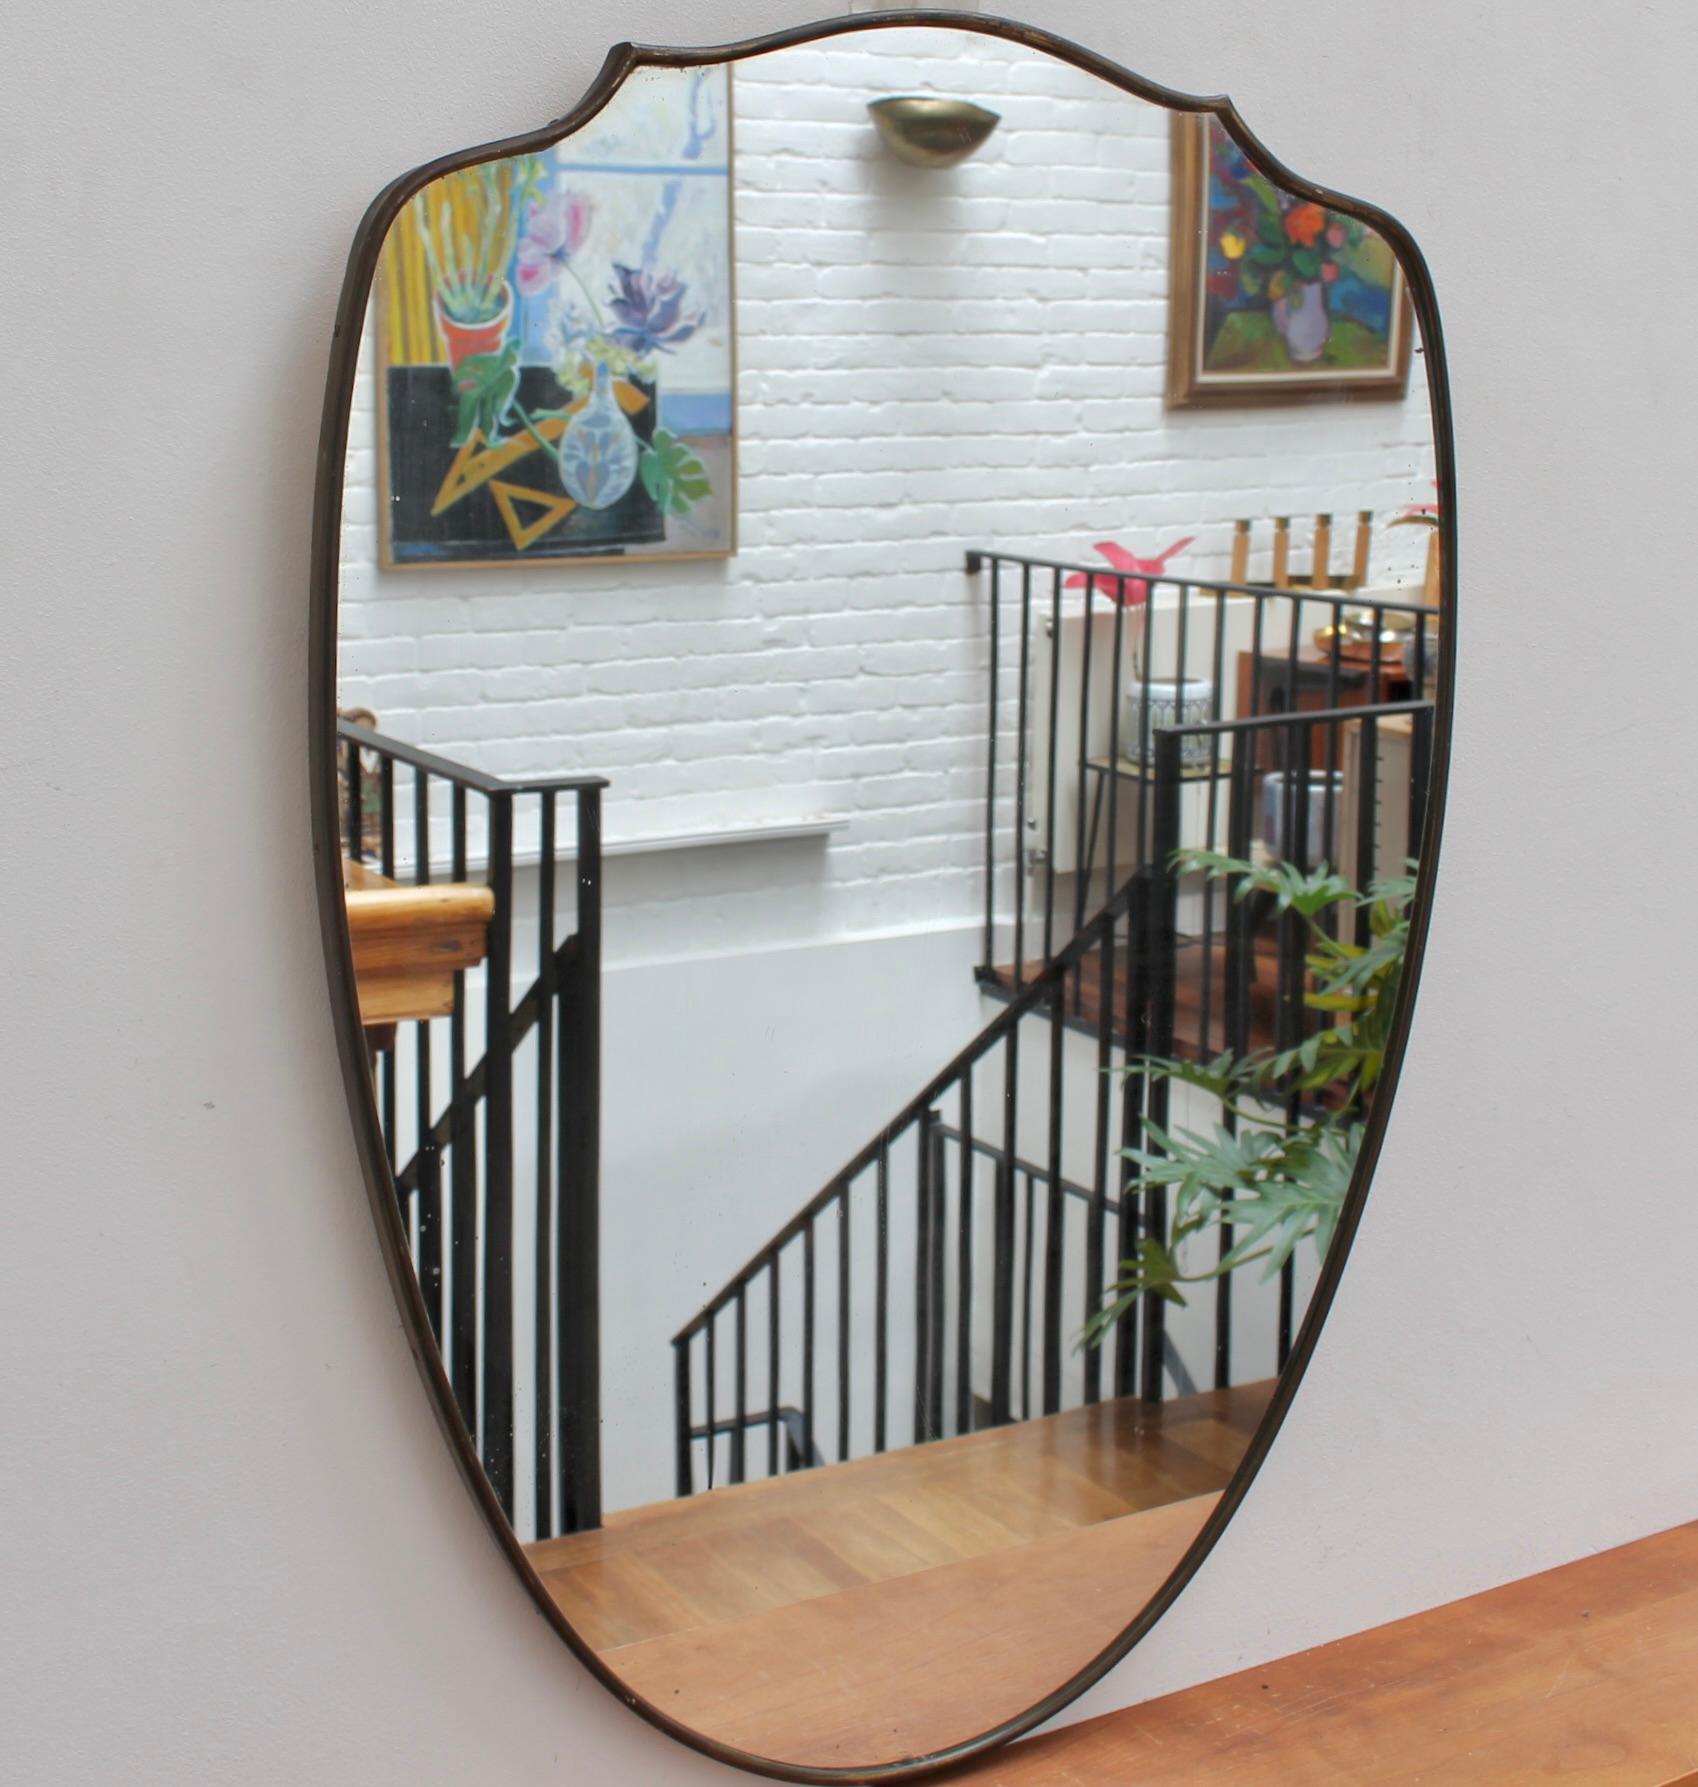 Mid-century Italian wall mirror with brass frame (circa 1950s). The mirror is classically-shaped and distinctive in a Modern style. It is in fair overall condition considering the presence of a small malformation in the glass near the base (see